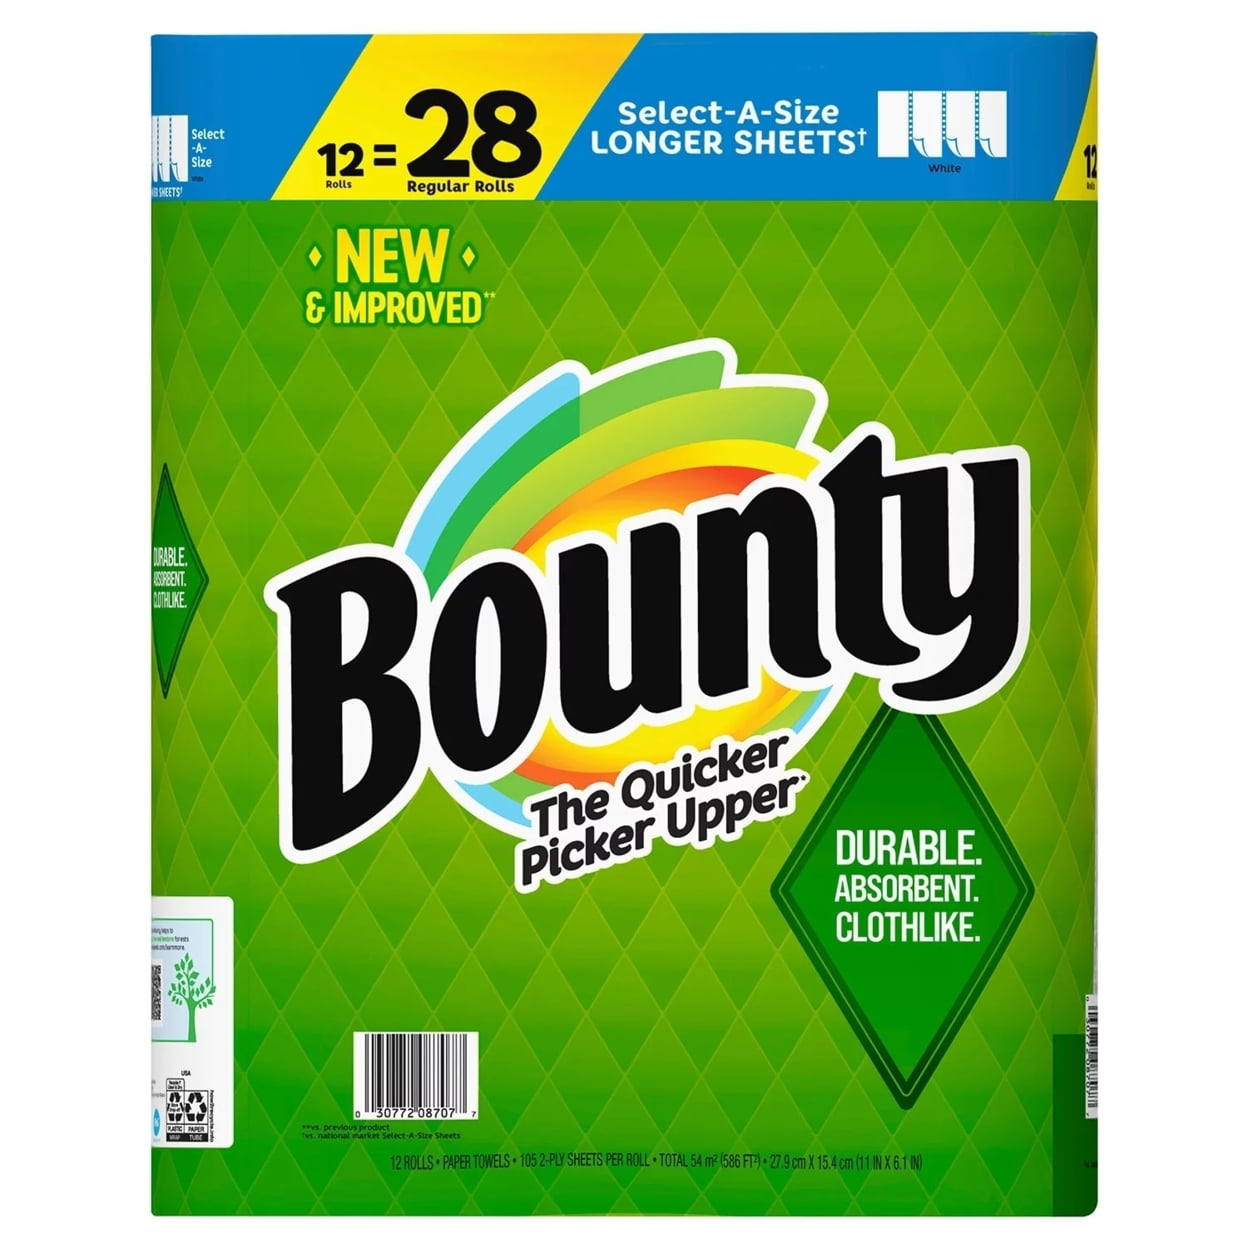 Bounty Select-A-Size Paper Towels, White (105 sheets/roll, 12